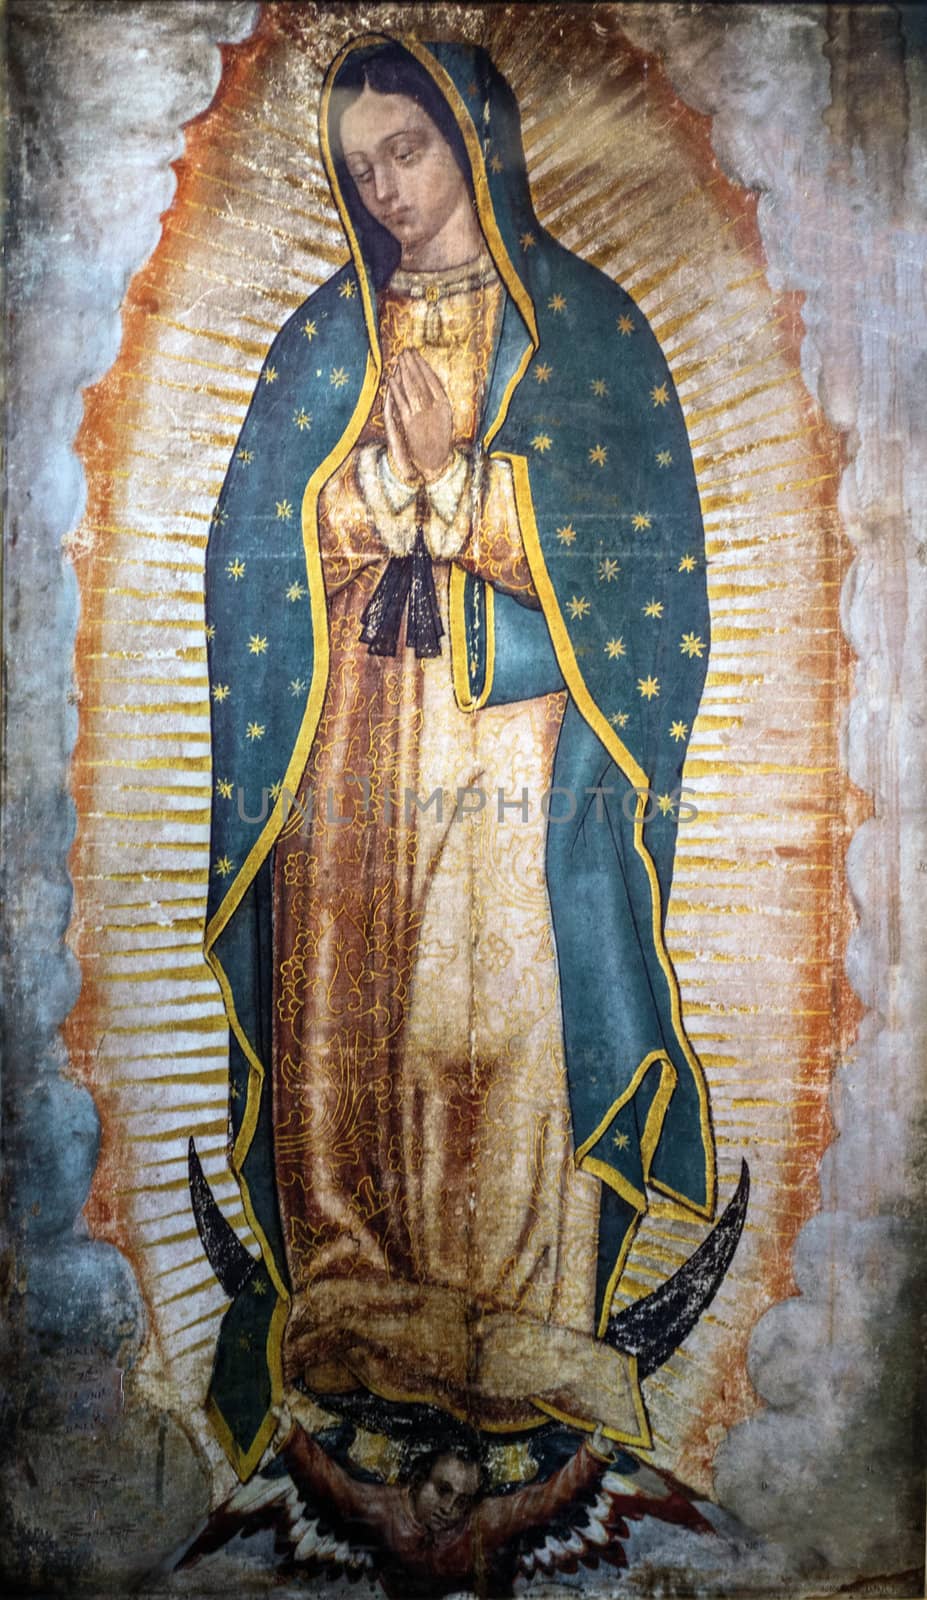 Image of Our Lady of Guadalupe in the New Basilica, Mexico by Marcus